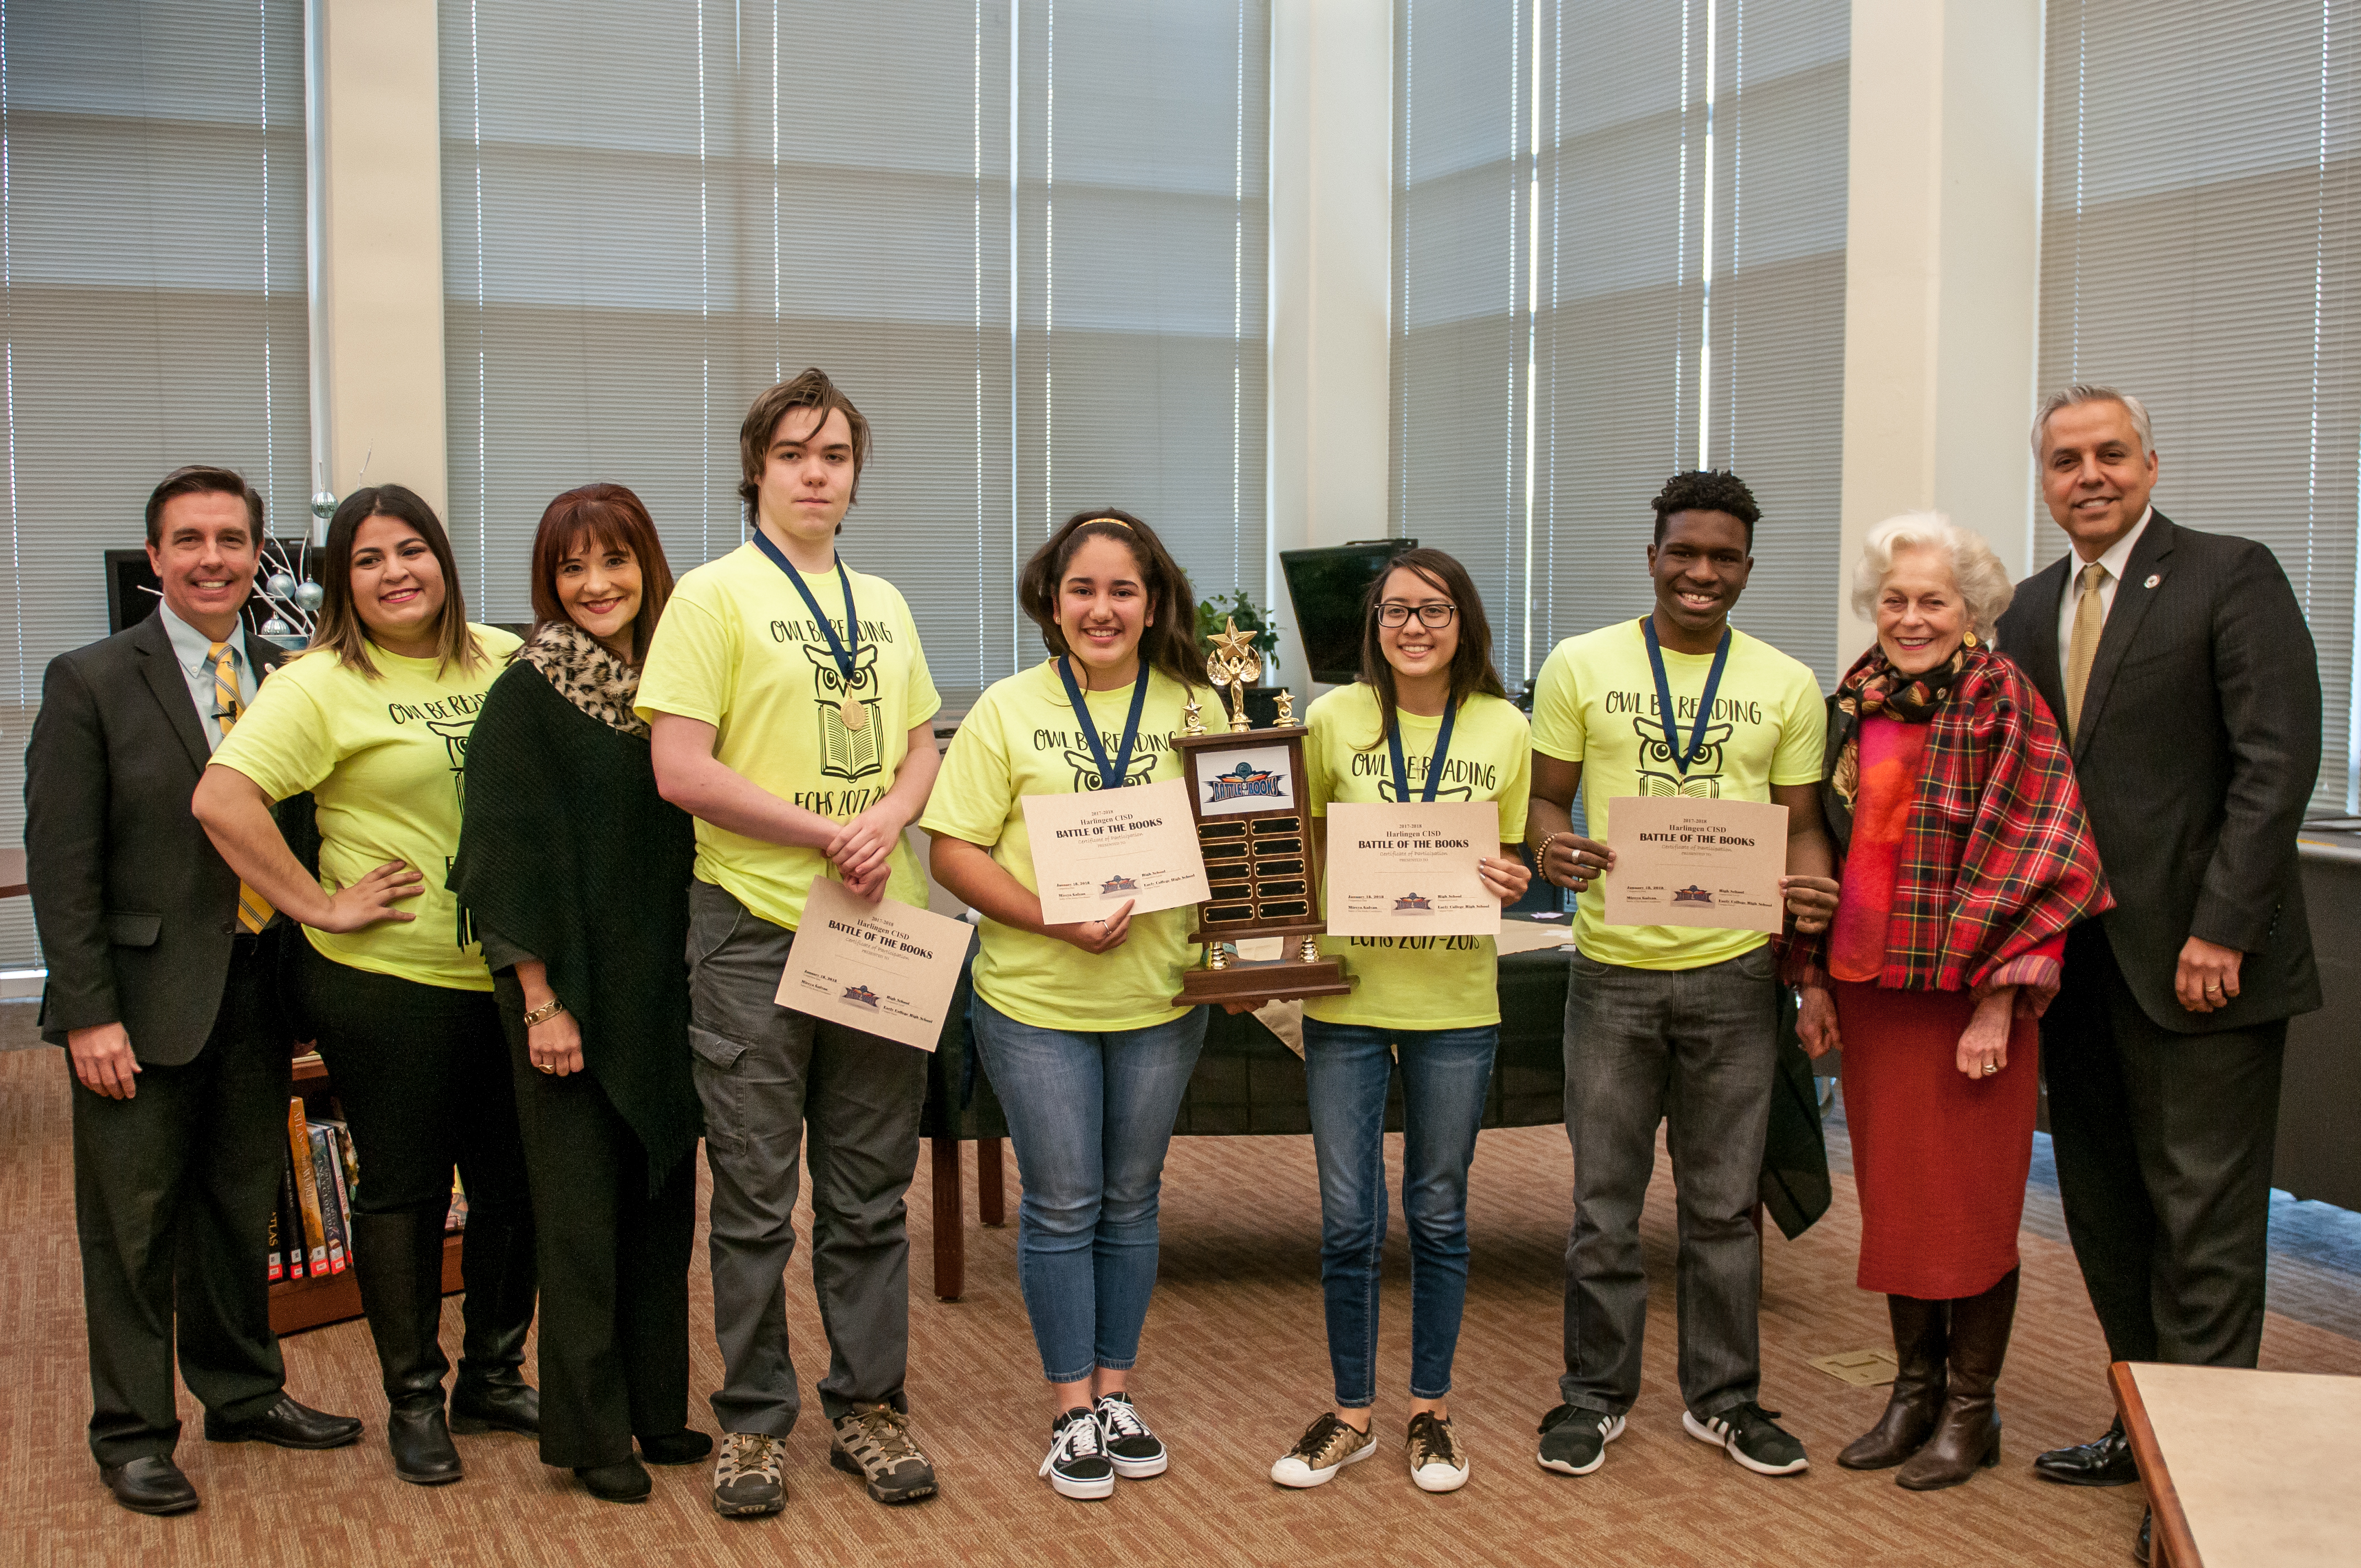 Book smarts: HCISD students put skills to the test in reading contest